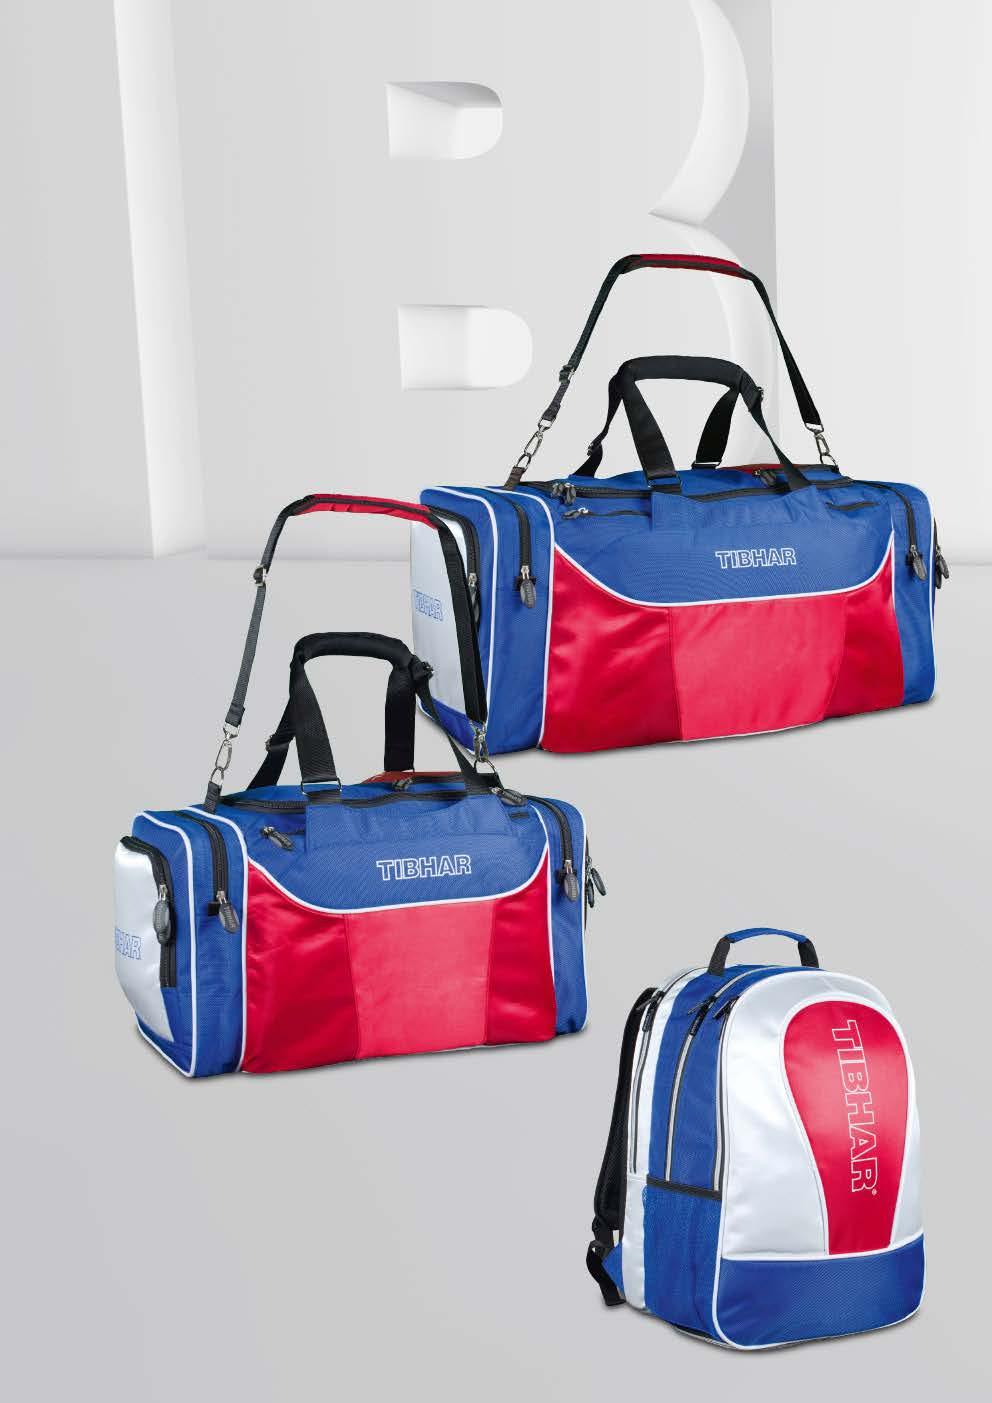 BAG TREND BIG Spacious sports bag featuring a big main compartment Side pockets to carry the small gear Maße: 70 x 36 x 32 cm blue/white/red BAG TREND SMALL Practical small sports bag Features a main